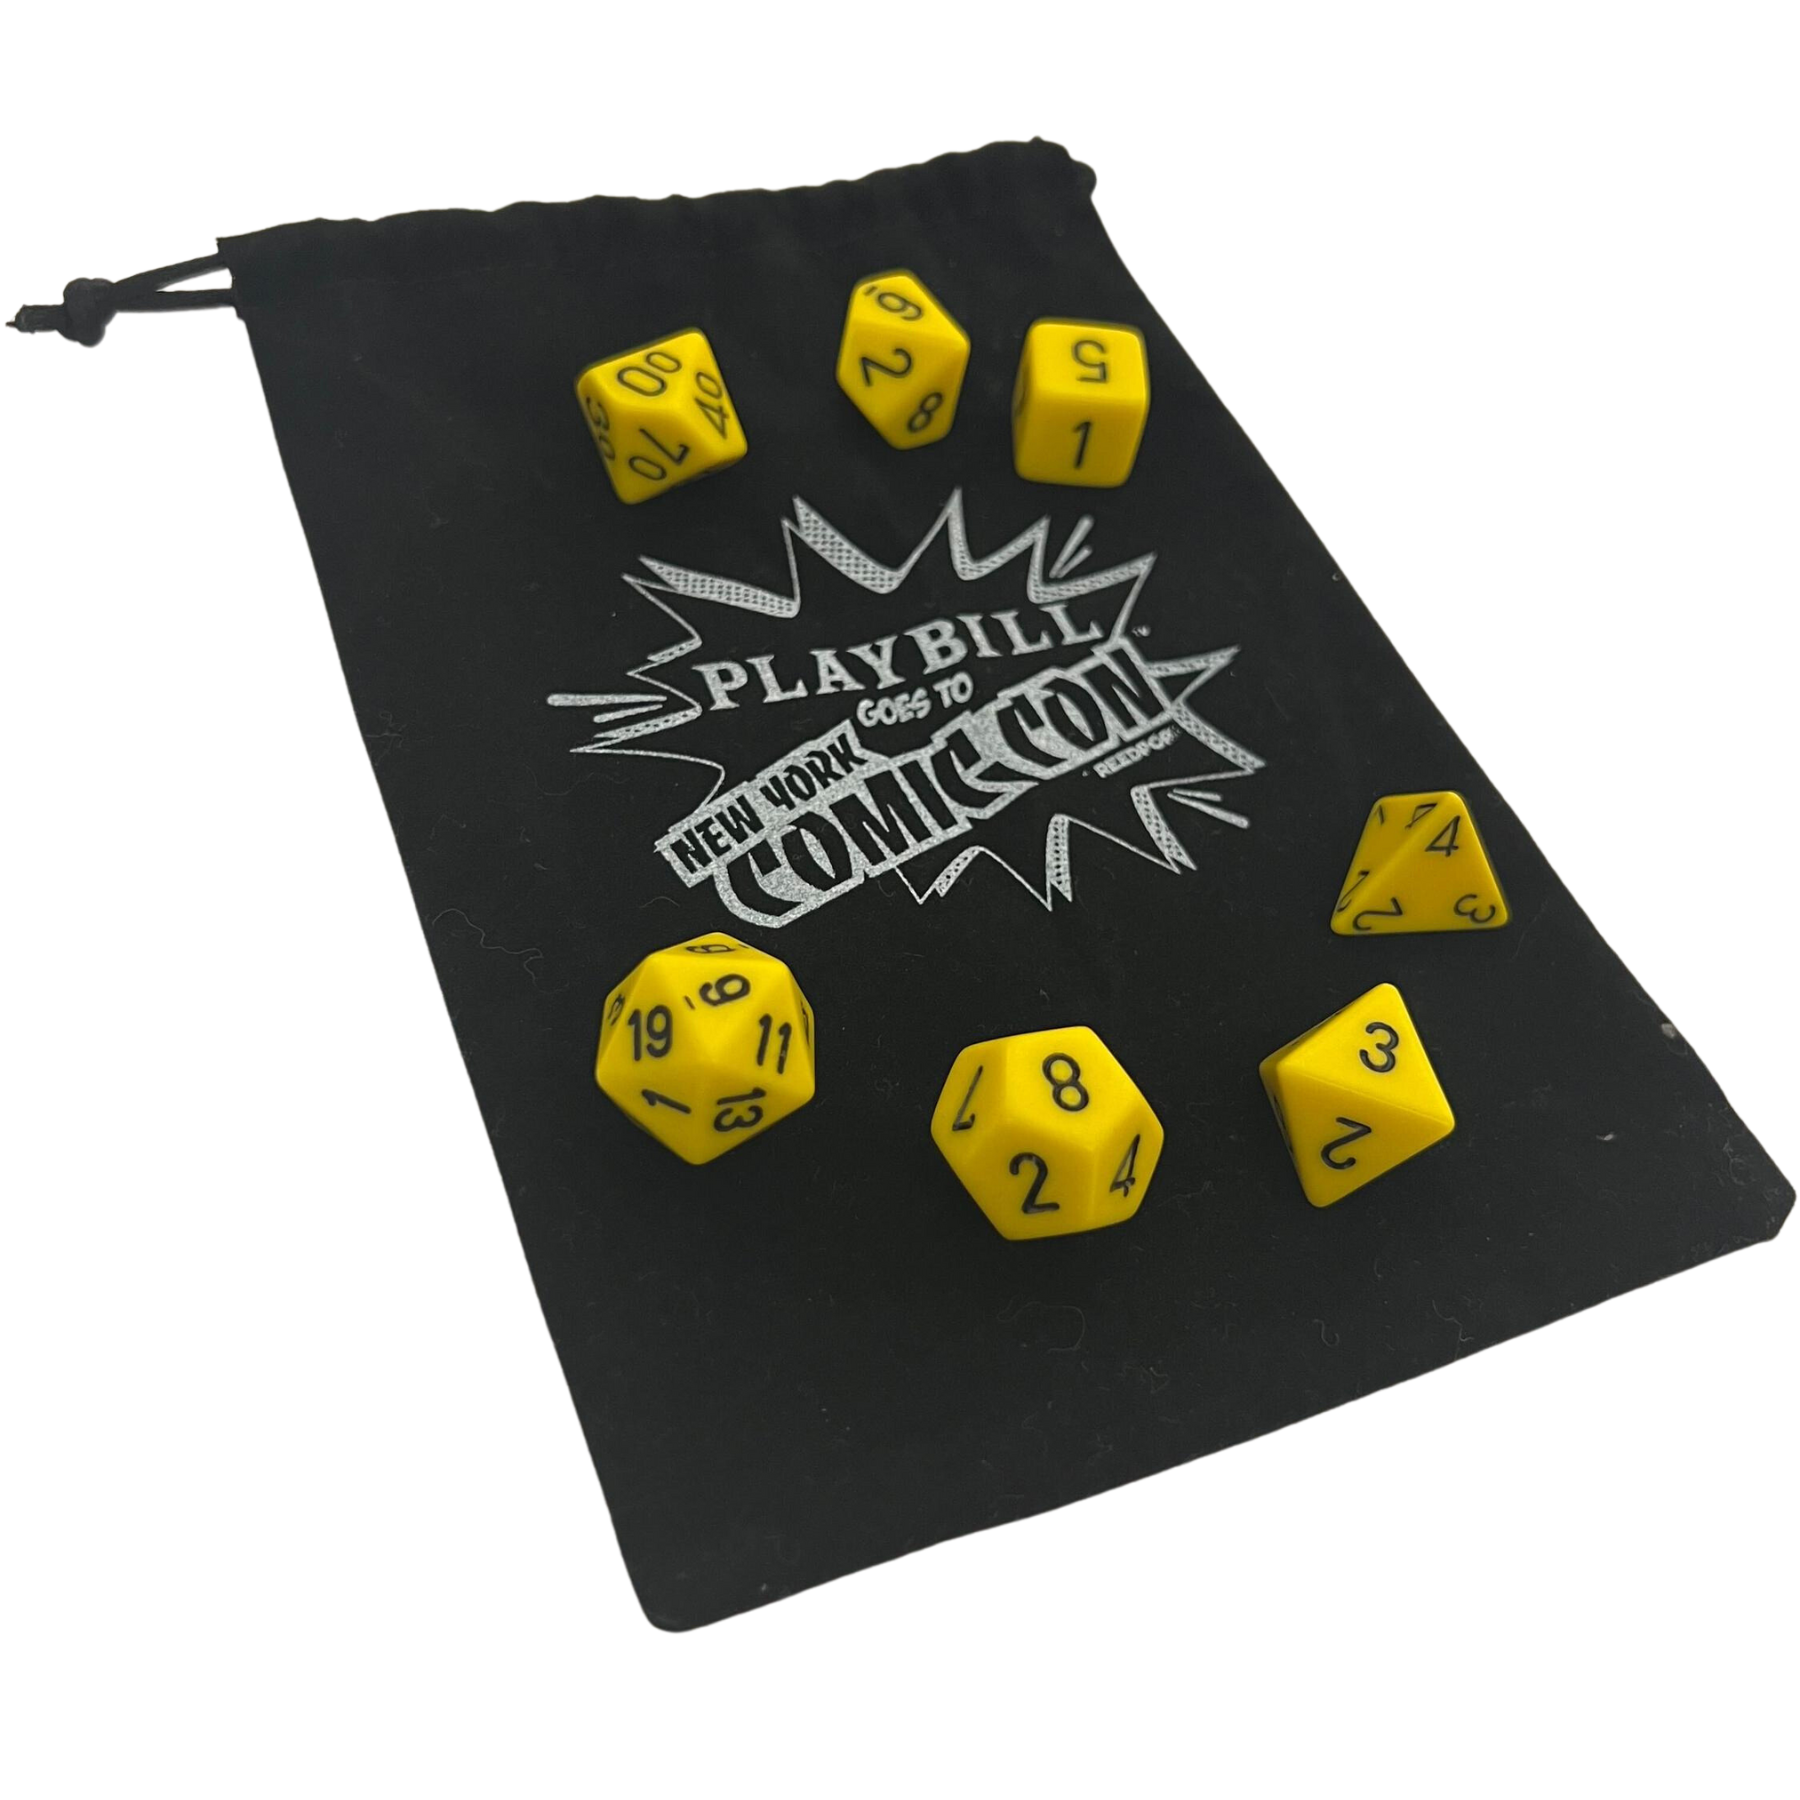 Playbill New York Comic Con Polyhedral Dice